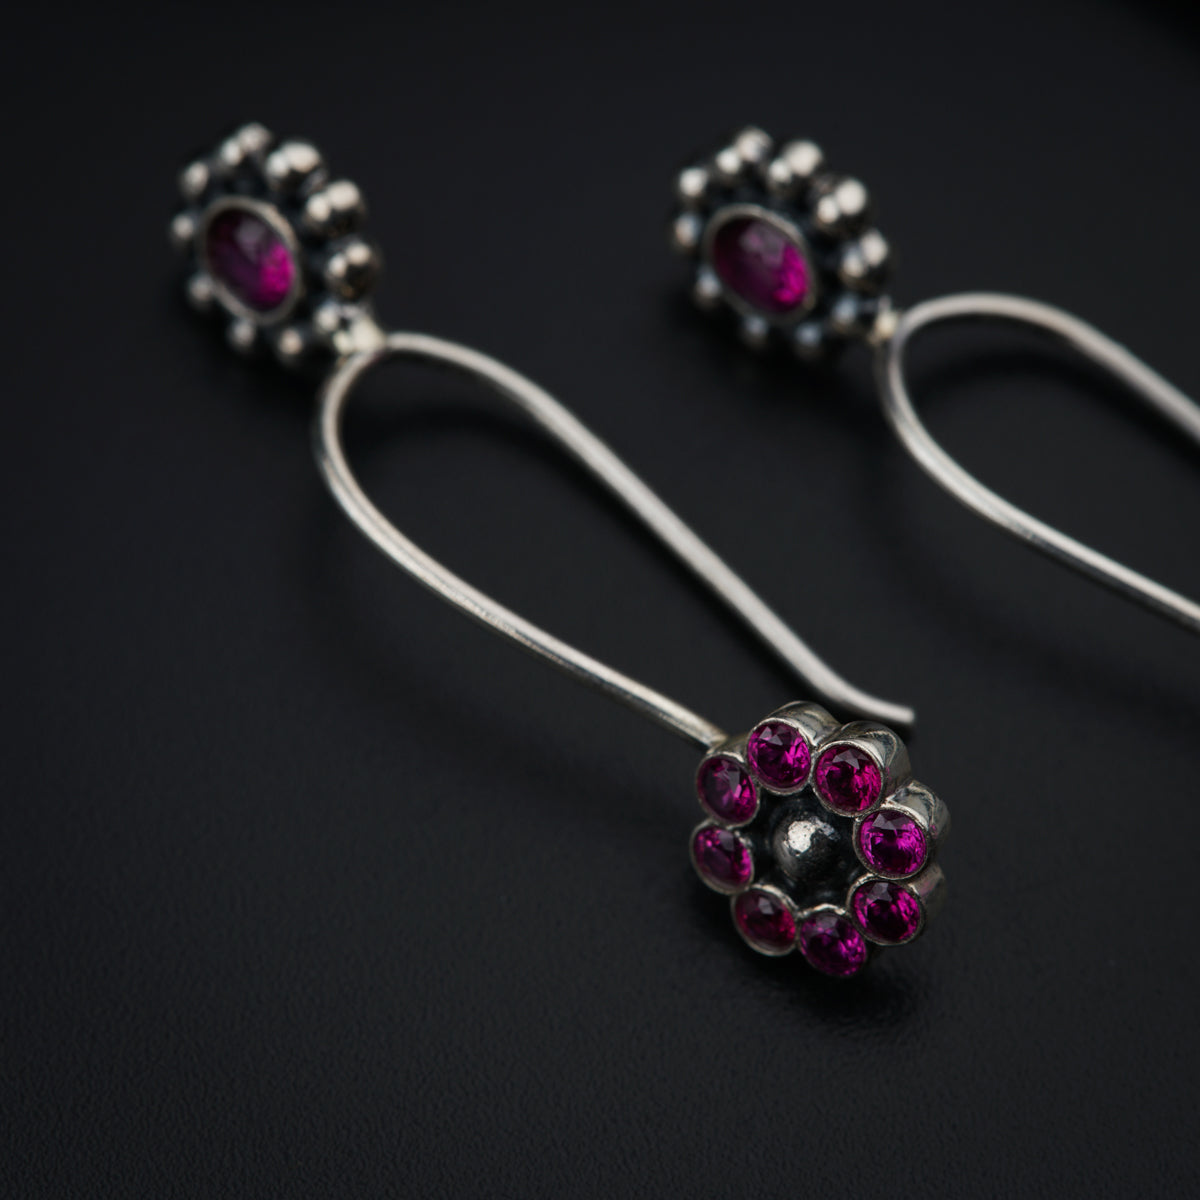 a pair of silver earrings with pink stones